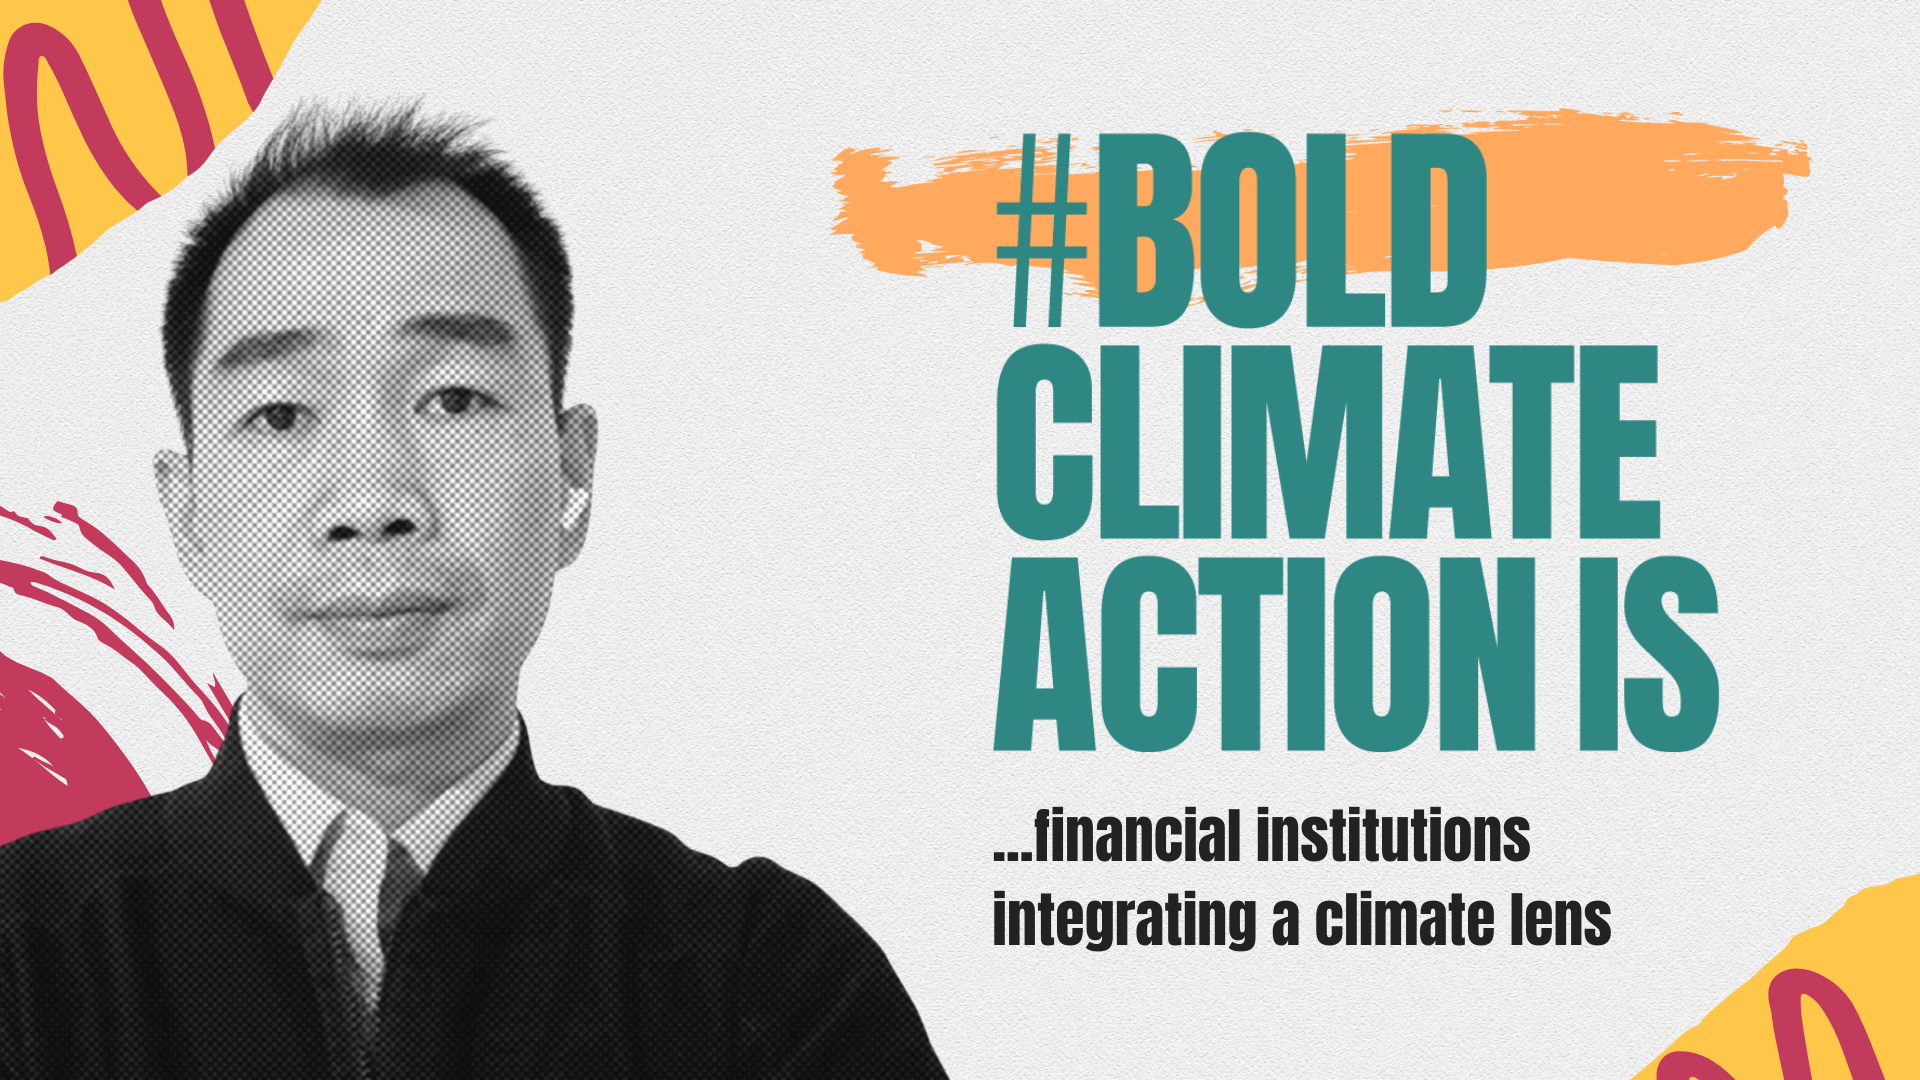 Changing the way financial institutions approach the climate crisis